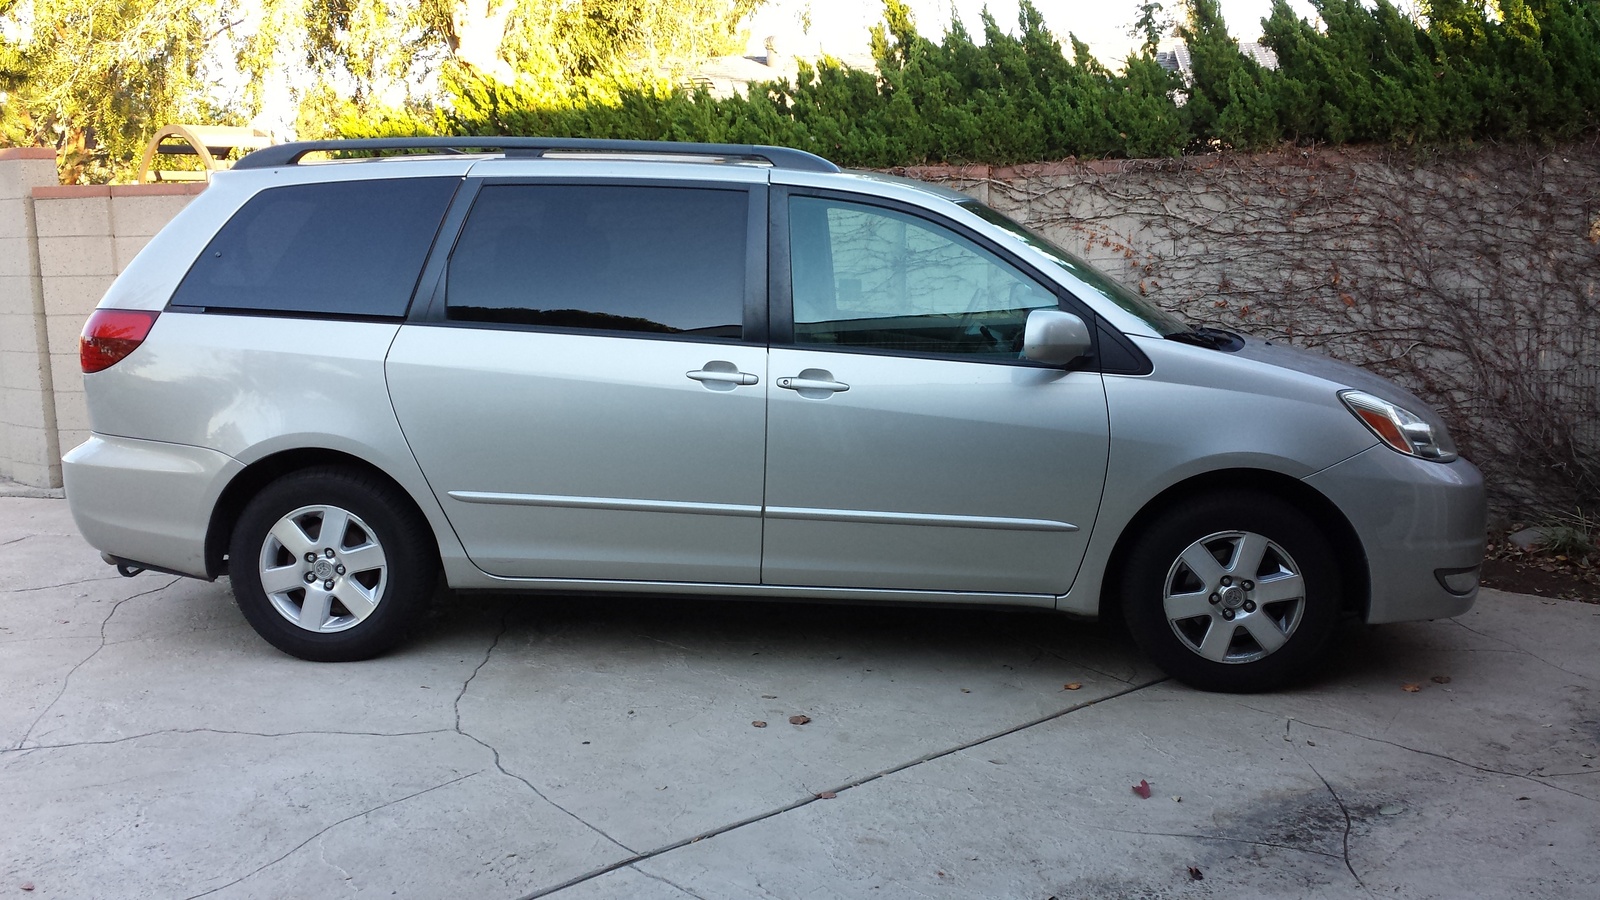 2004 toyota sienna edmunds review #2